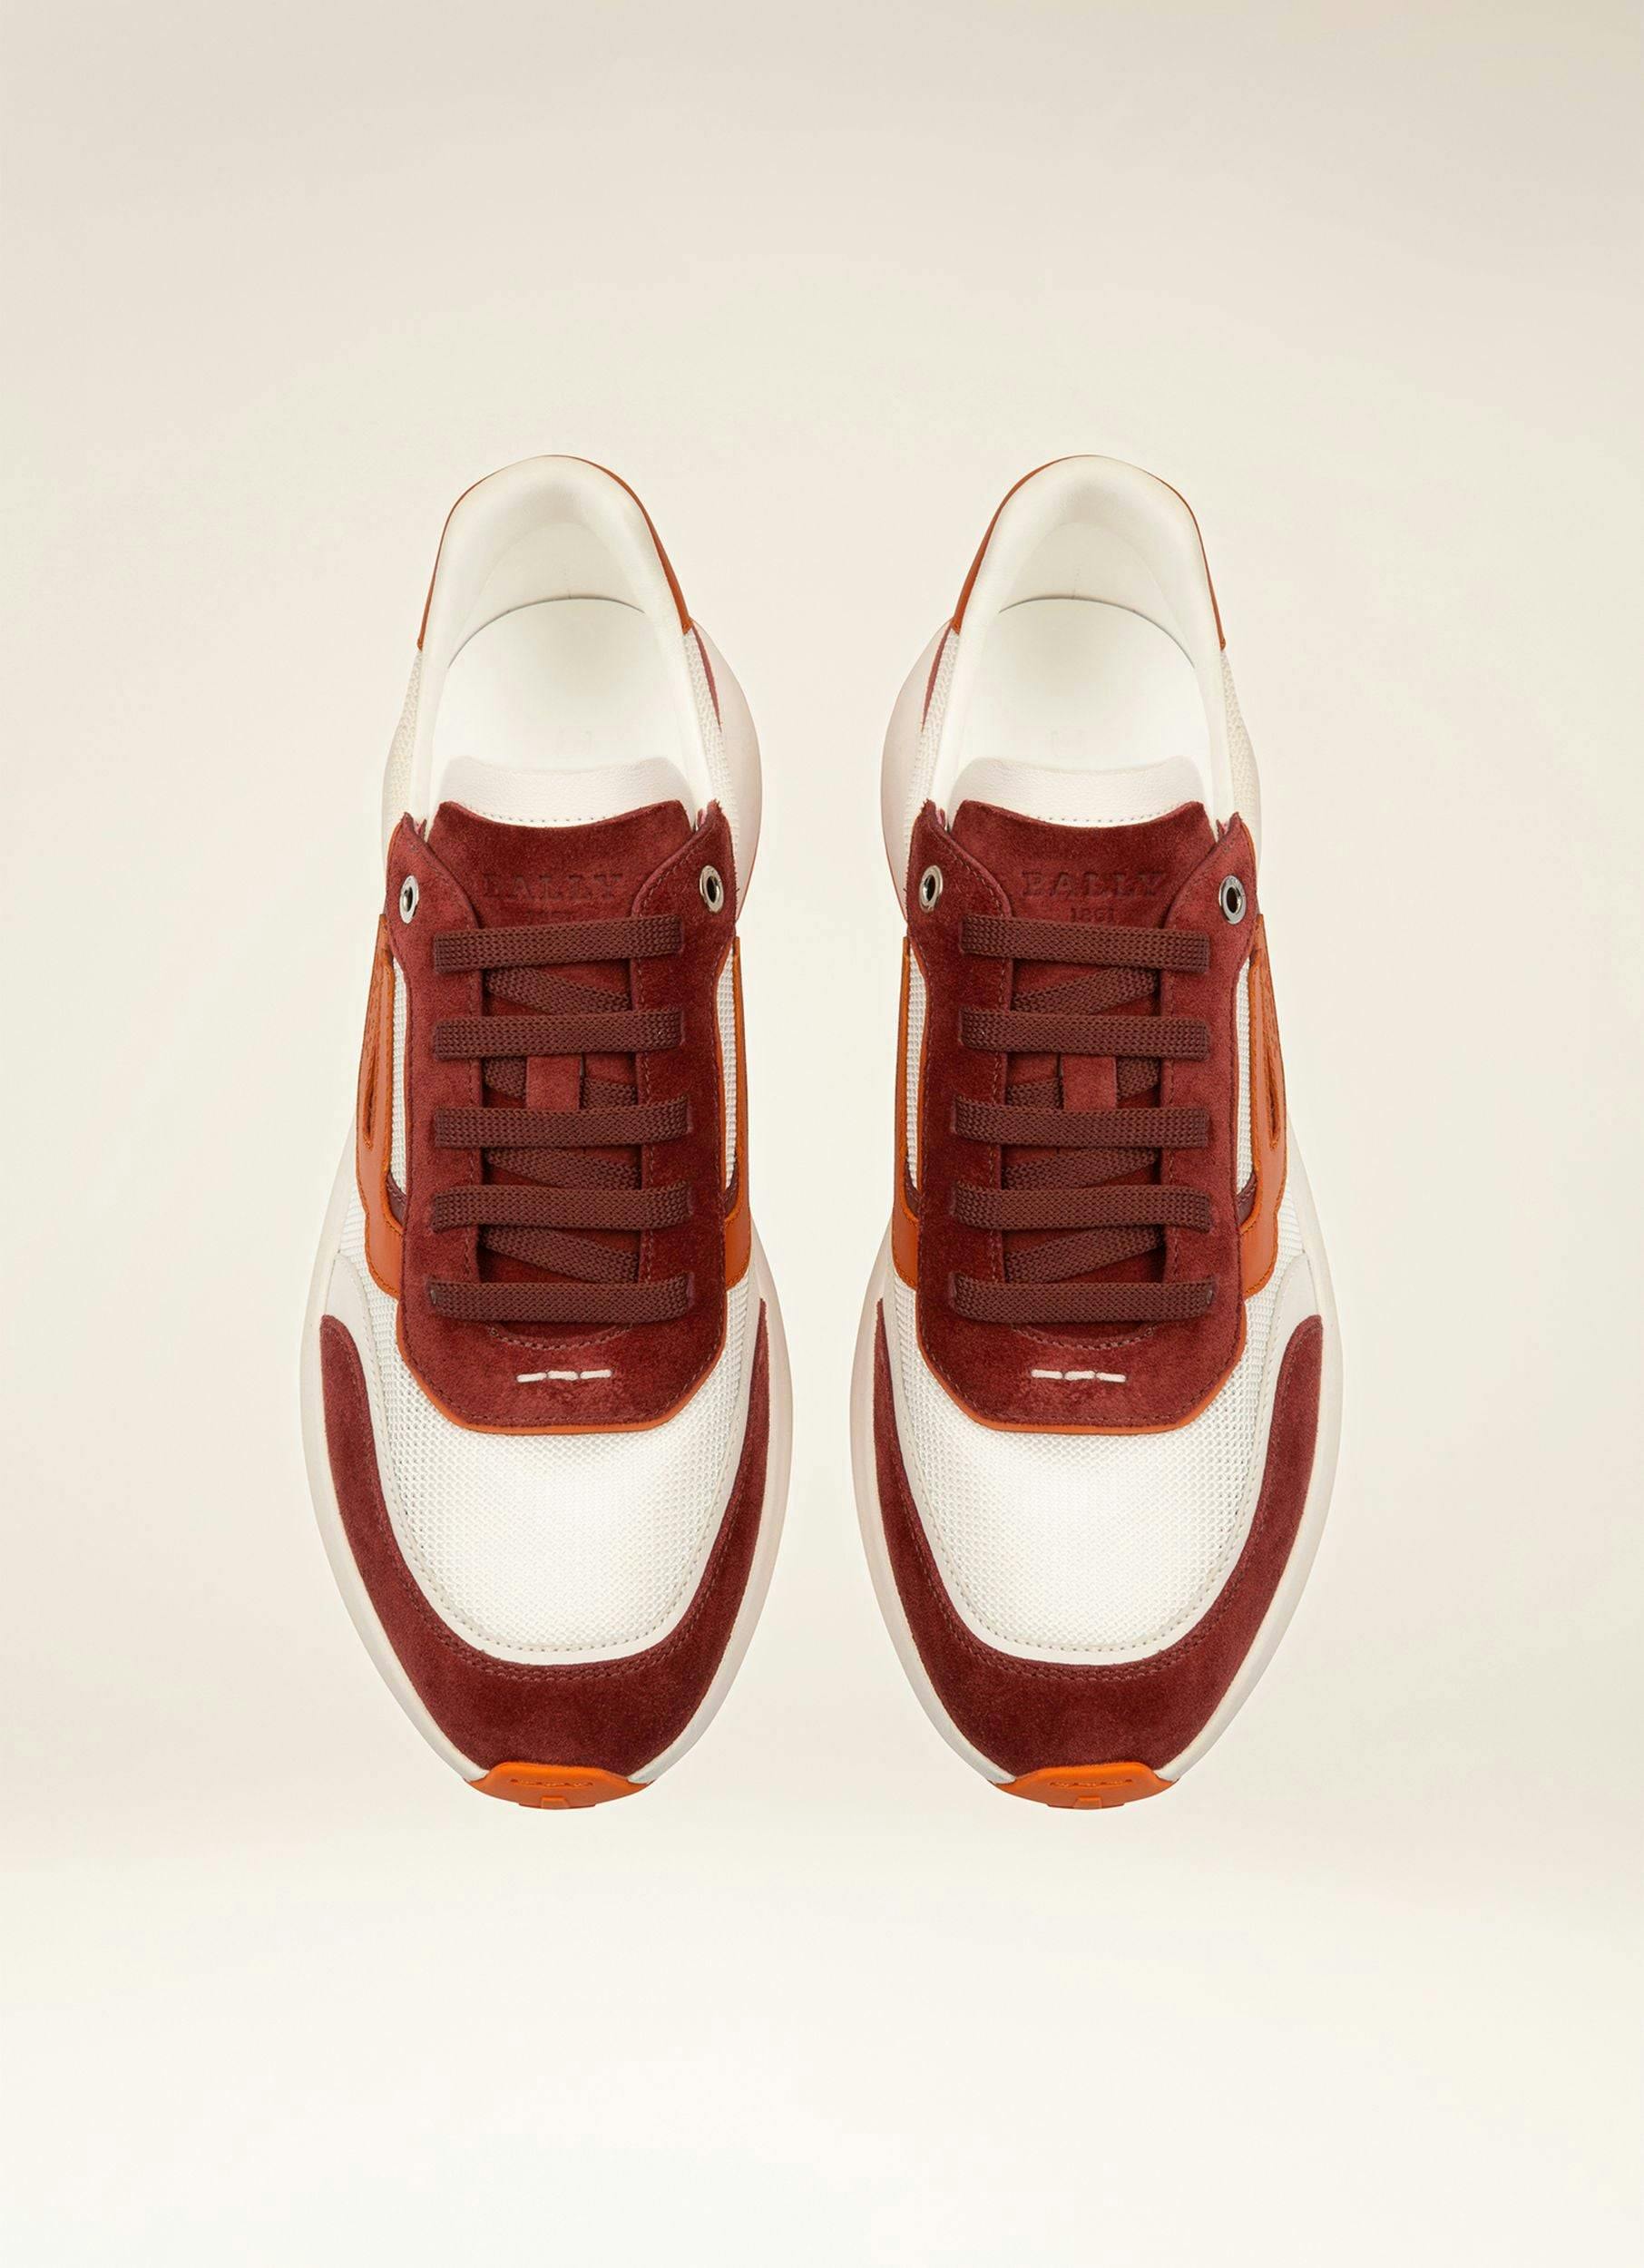 Demmy Mesh & Leather Sneakers In Heritage Red & White - Men's - Bally - 04